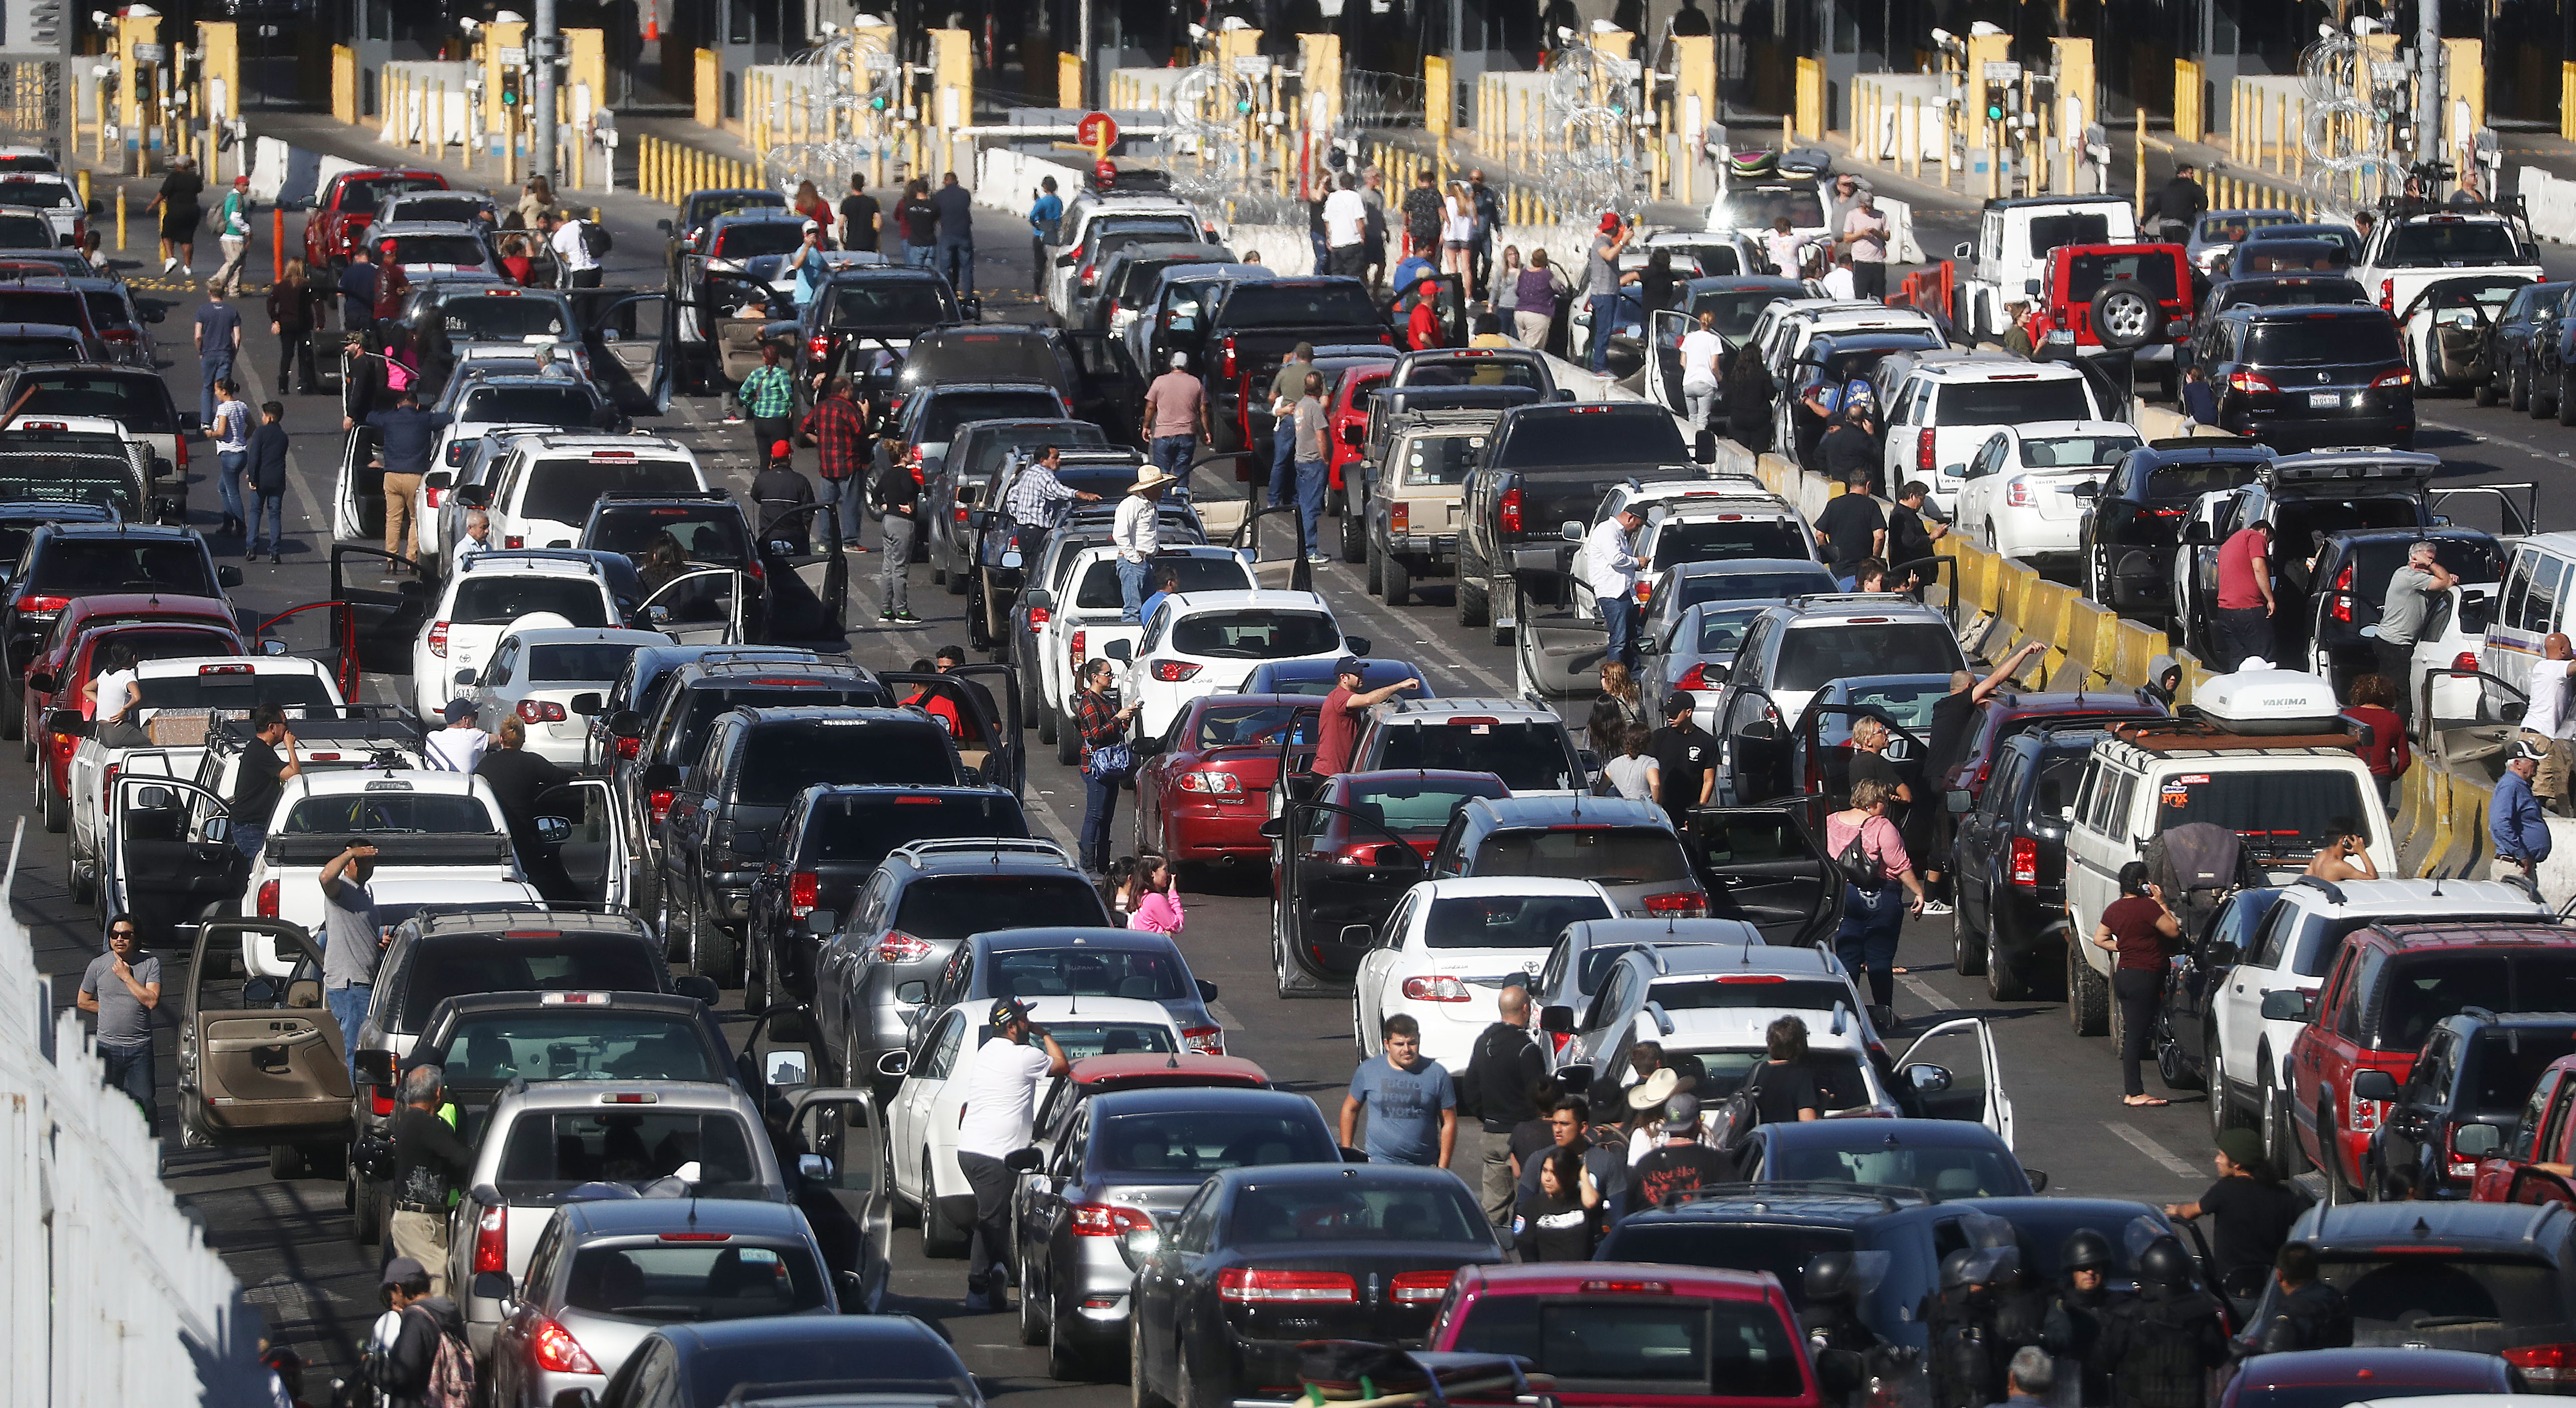 TIJUANA, MEXICO - NOVEMBER 25: People attempting to cross into the U.S. look on by their vehicles as the San Ysidro port of entry stands closed at the U.S.-Mexico border on November 25, 2018 in Tijuana, Mexico. Migrants circumvented a police blockade as they attempted to approach the El Chaparral port of entry and U.S. Customs and Border Protection temporarily closed the two ports of entry on the border with Tijuana in response. Around 6,000 migrants from Central America have arrived in the city with the mayor of Tijuana declaring the situation a 'humanitarian crisis'. (Photo by Mario Tama/Getty Images)